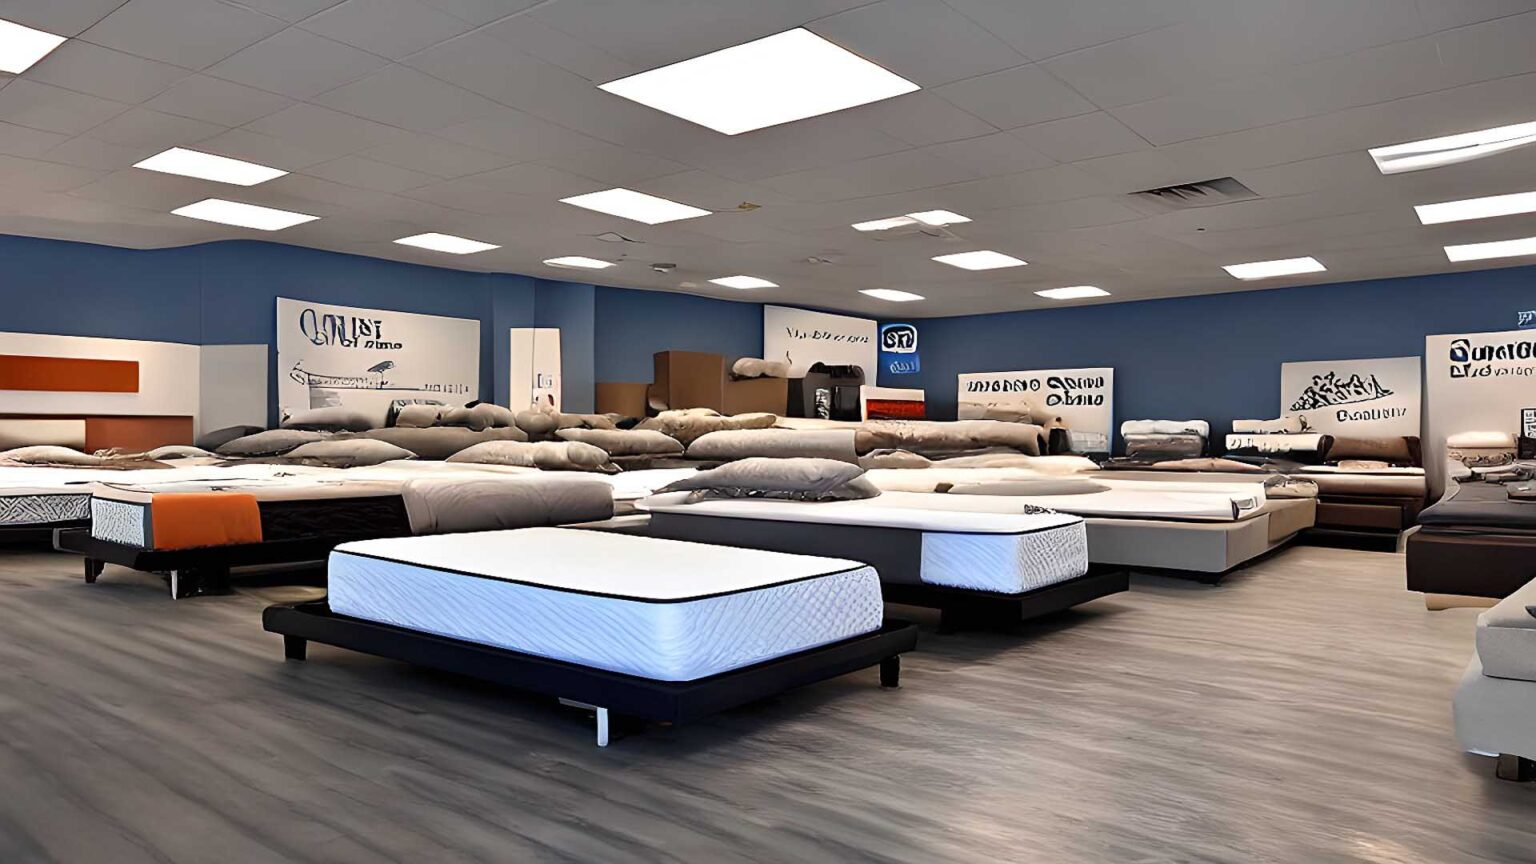 Mattress Stores, mattress dealers, and mattress retailers near me in Albany, NY